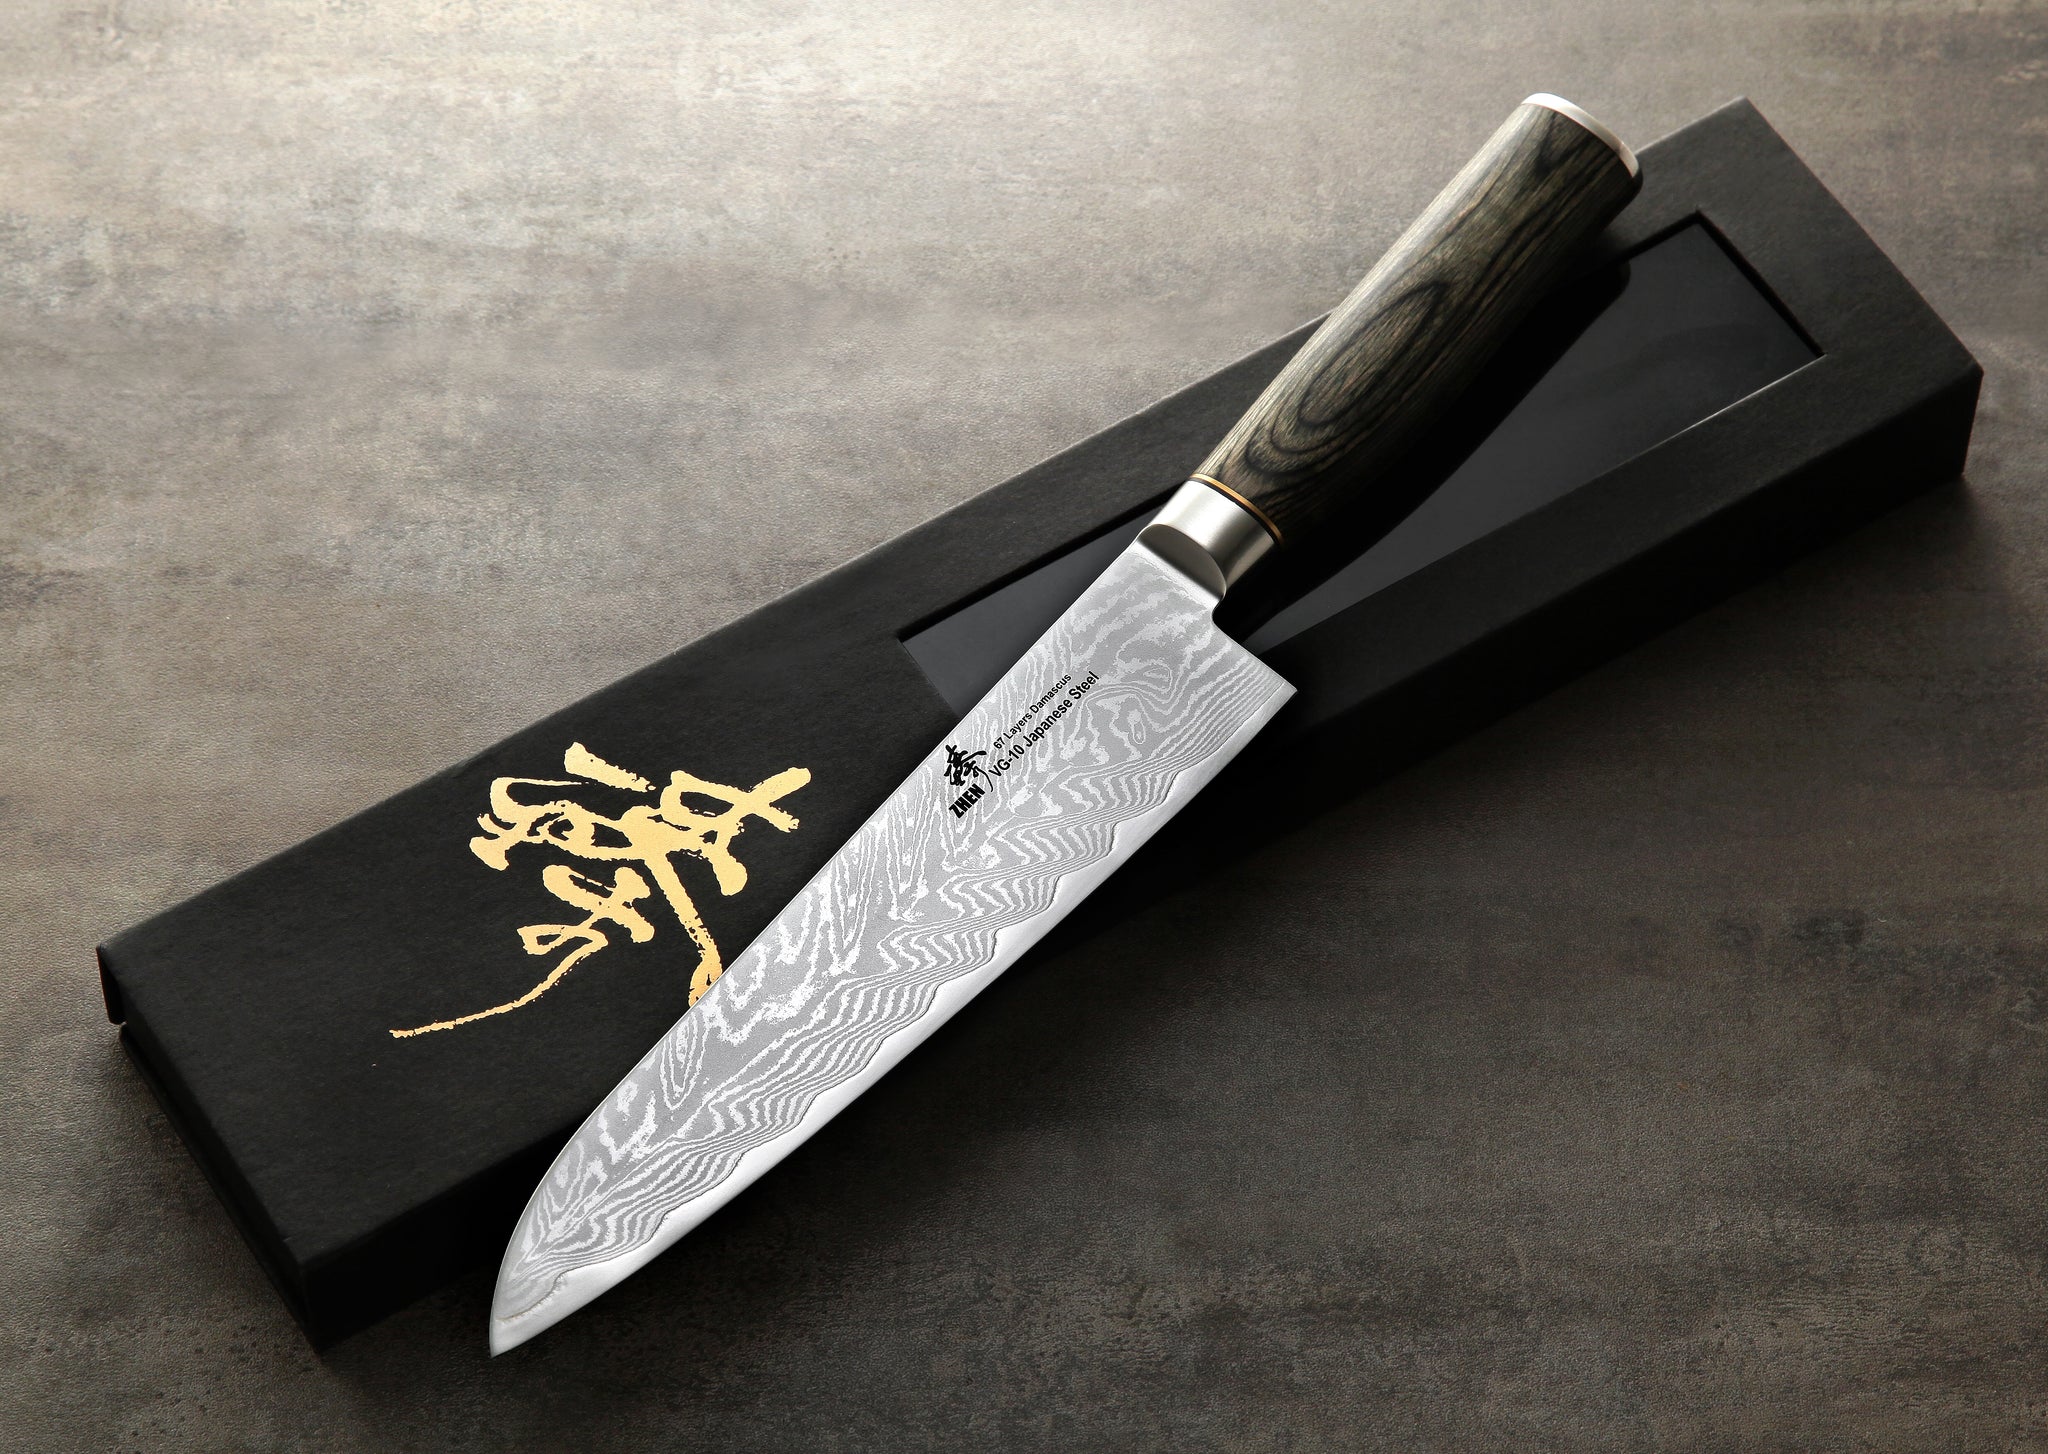 8 Inch Damascus Chef Knife 